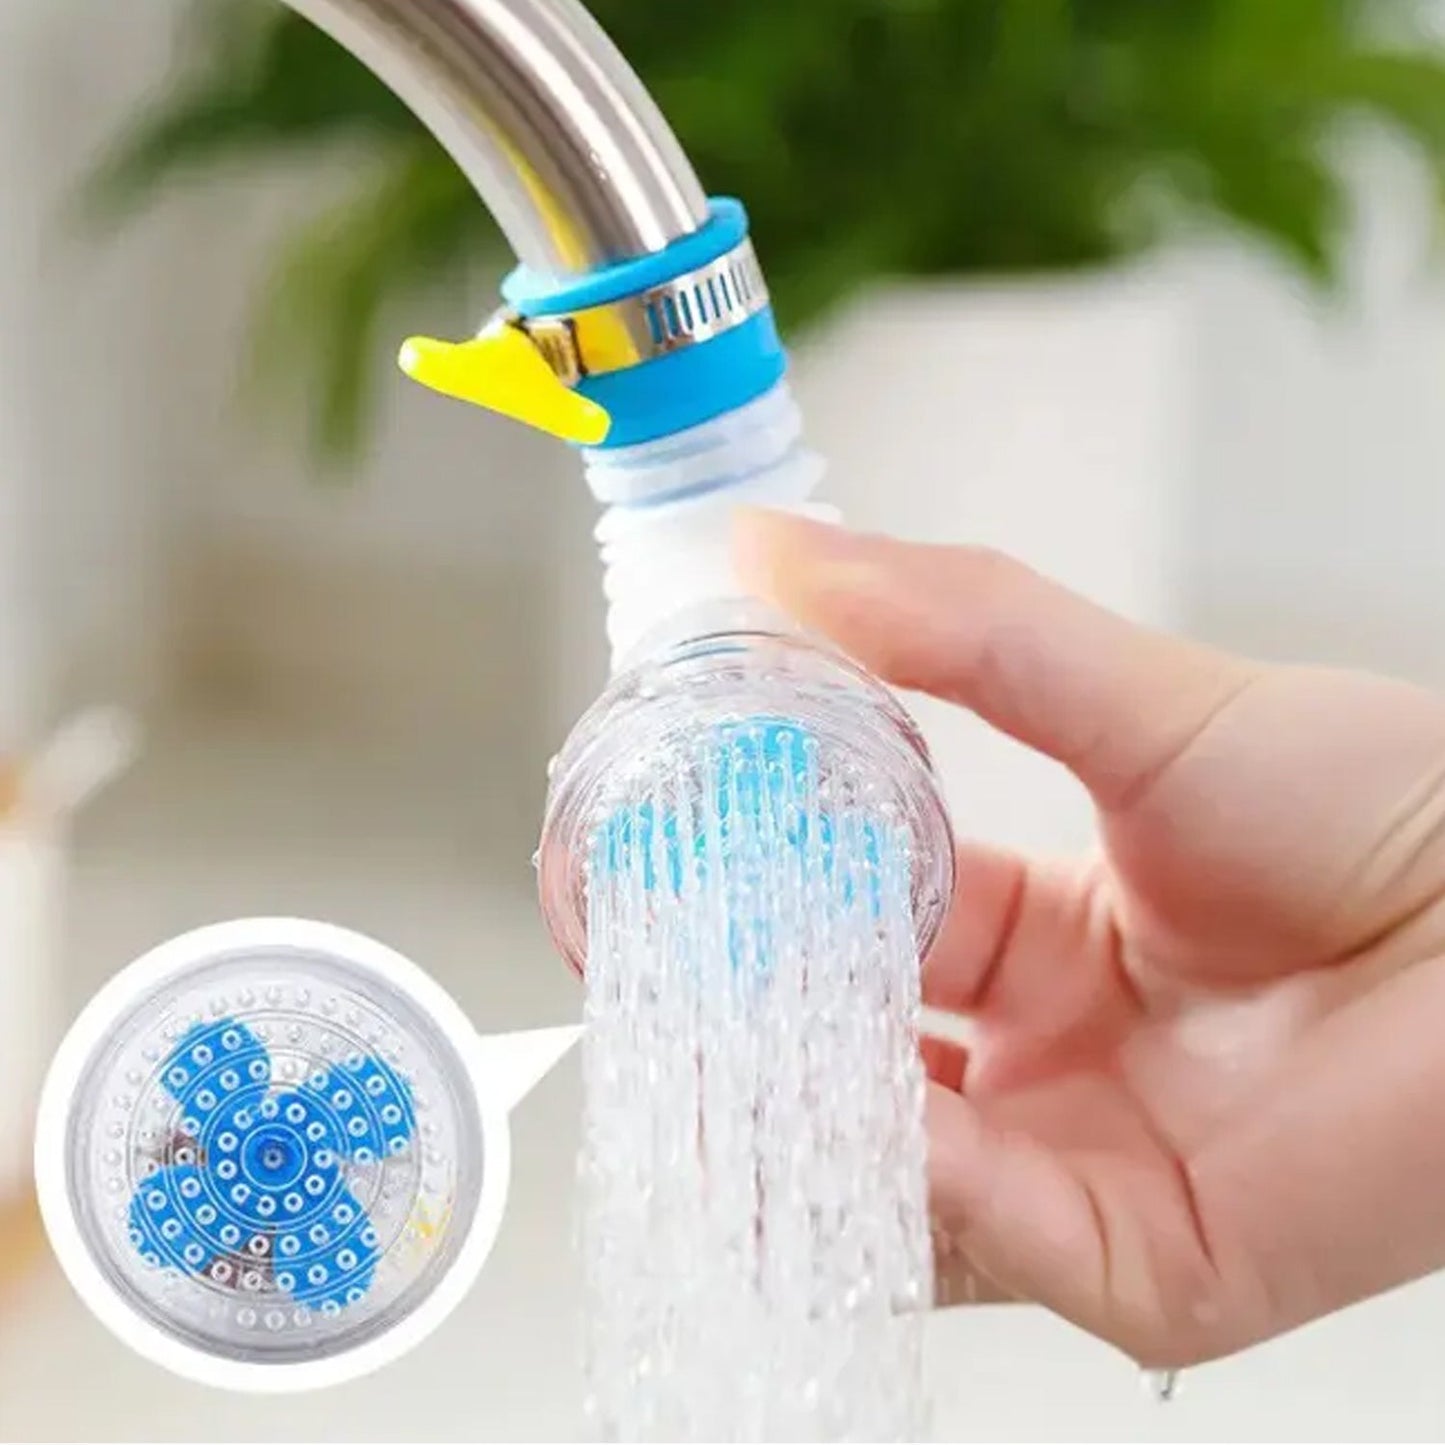 0208b 360° Adjustable Rotating Water Saving Nozzle Shower Head Faucet Multiple Types of Output Water Valve Splash Regulator Filter Kitchen Tap Accessories, Bathroom Use (1 Pc)